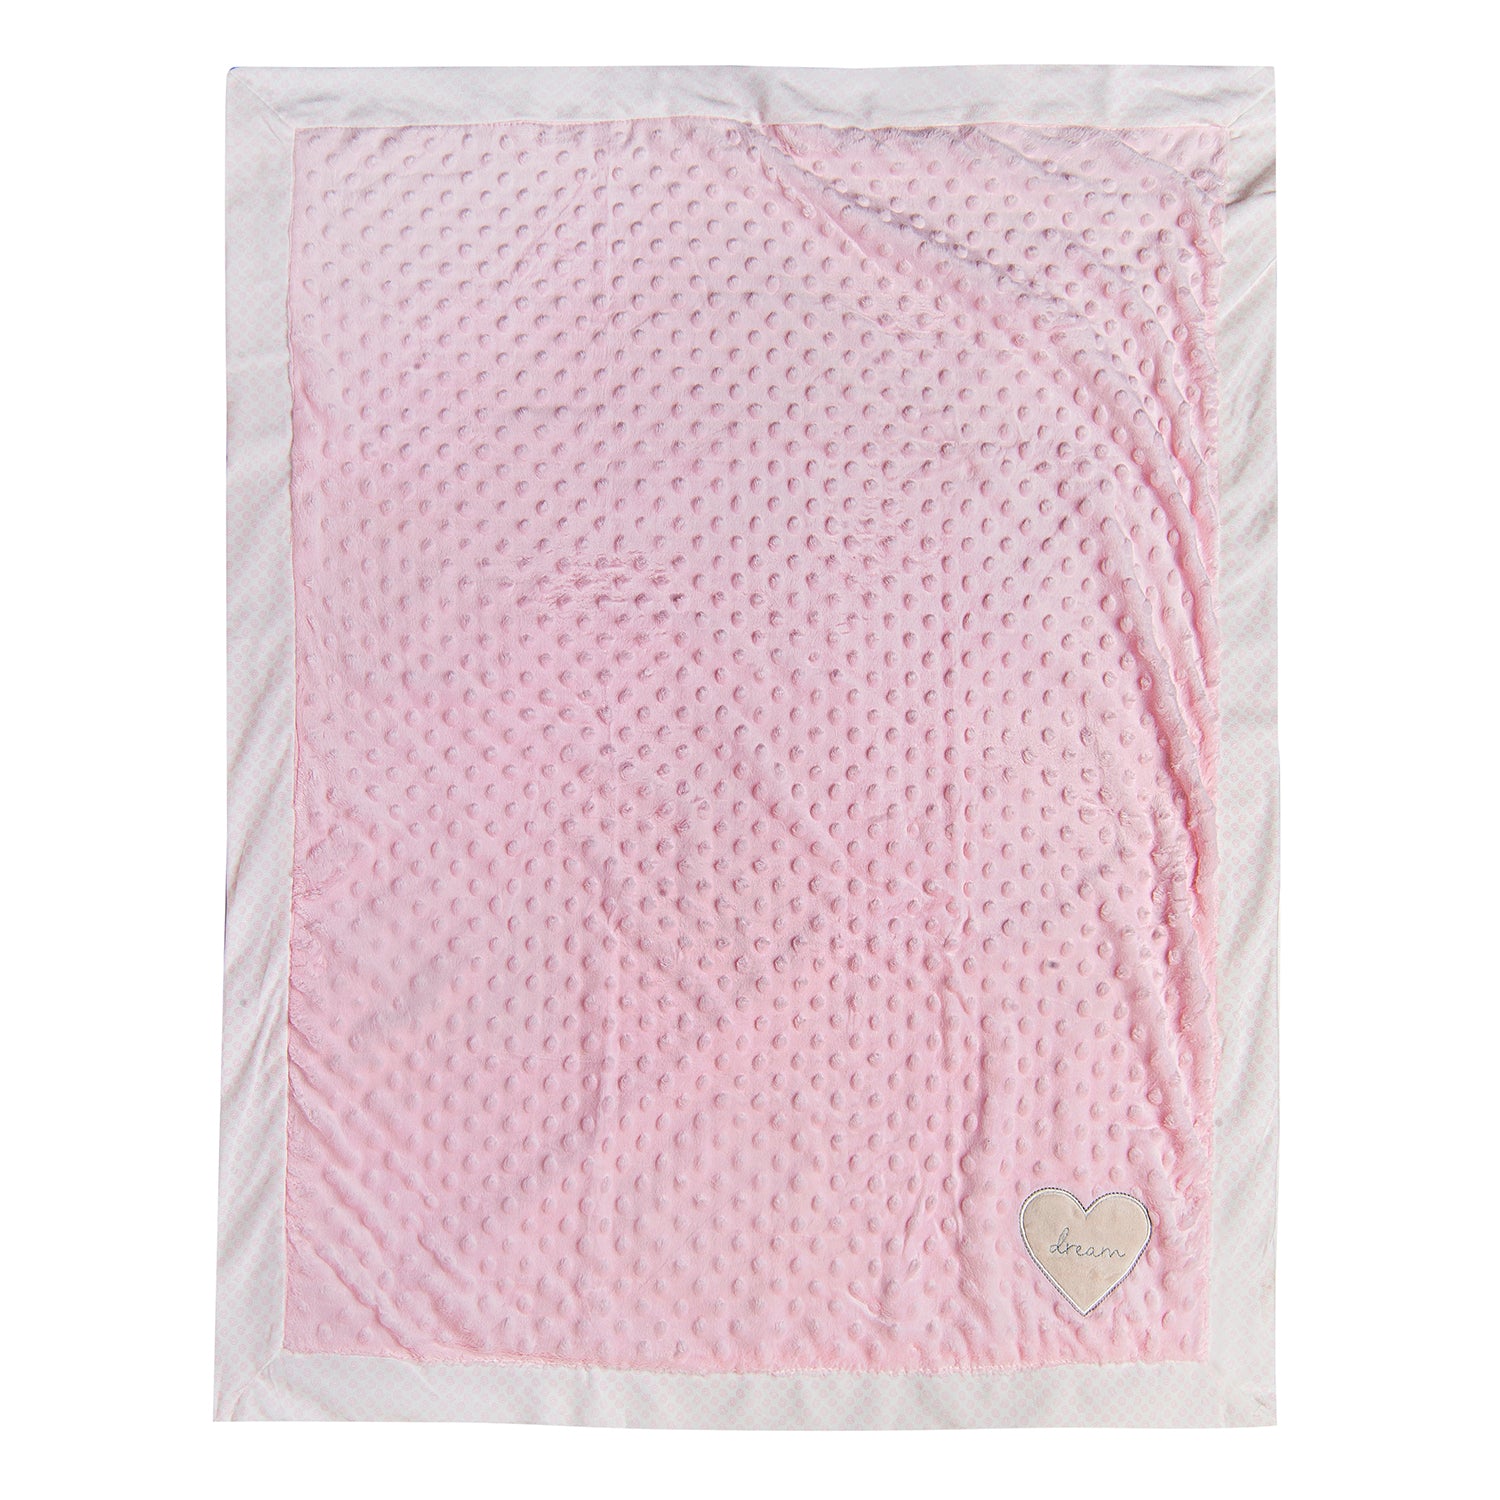 Baby Moo Heart Full Of Dreams Soft Reversible Bubble Blanket Pink